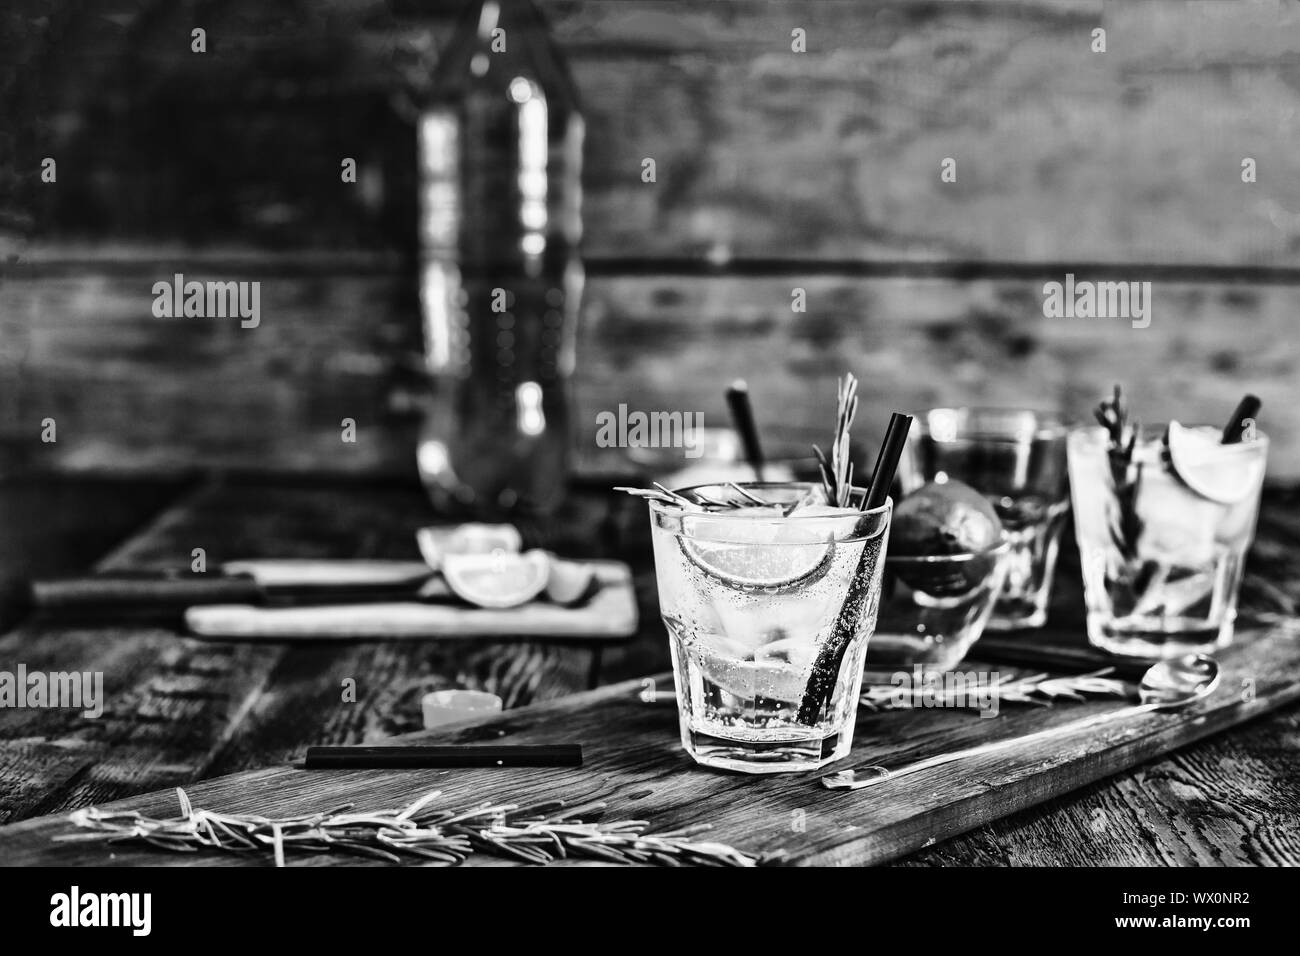 https://c8.alamy.com/comp/WX0NR2/black-and-white-alcohol-cocktail-mojito-drink-summer-mint-copy-space-WX0NR2.jpg